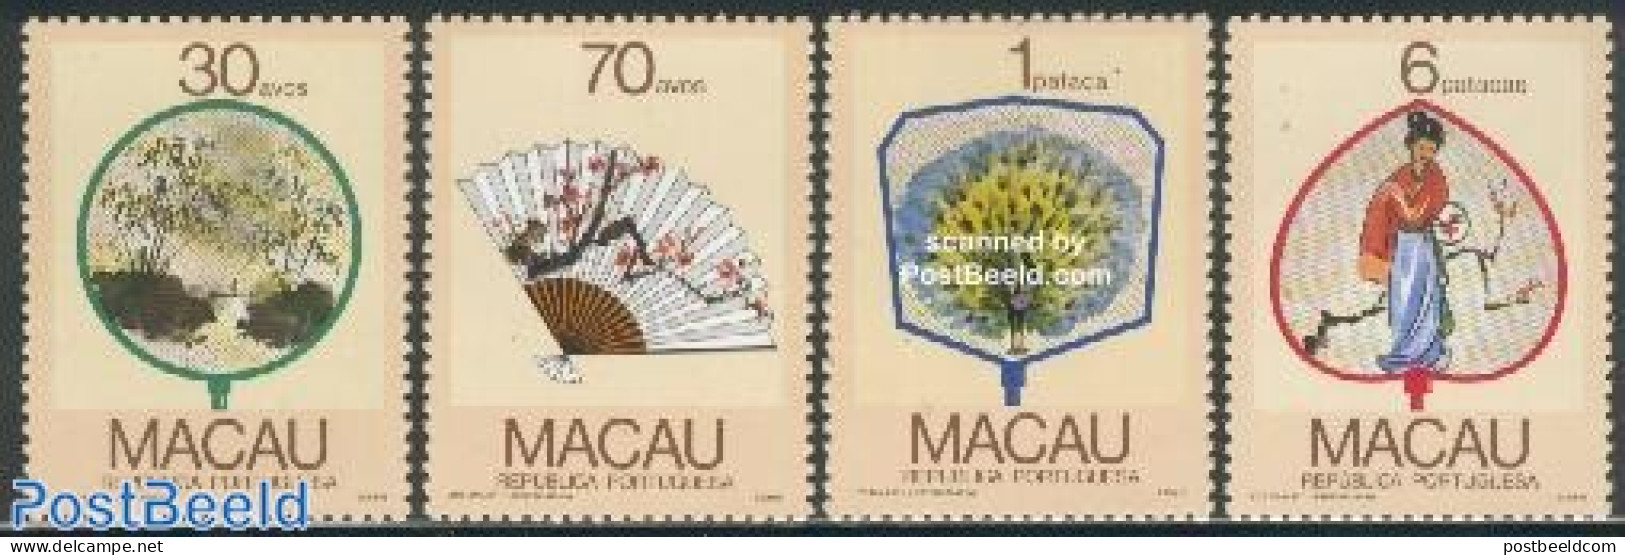 Macao 1987 Fans 4v, Mint NH, Nature - Birds - Art - Art & Antique Objects - Fans - Unused Stamps